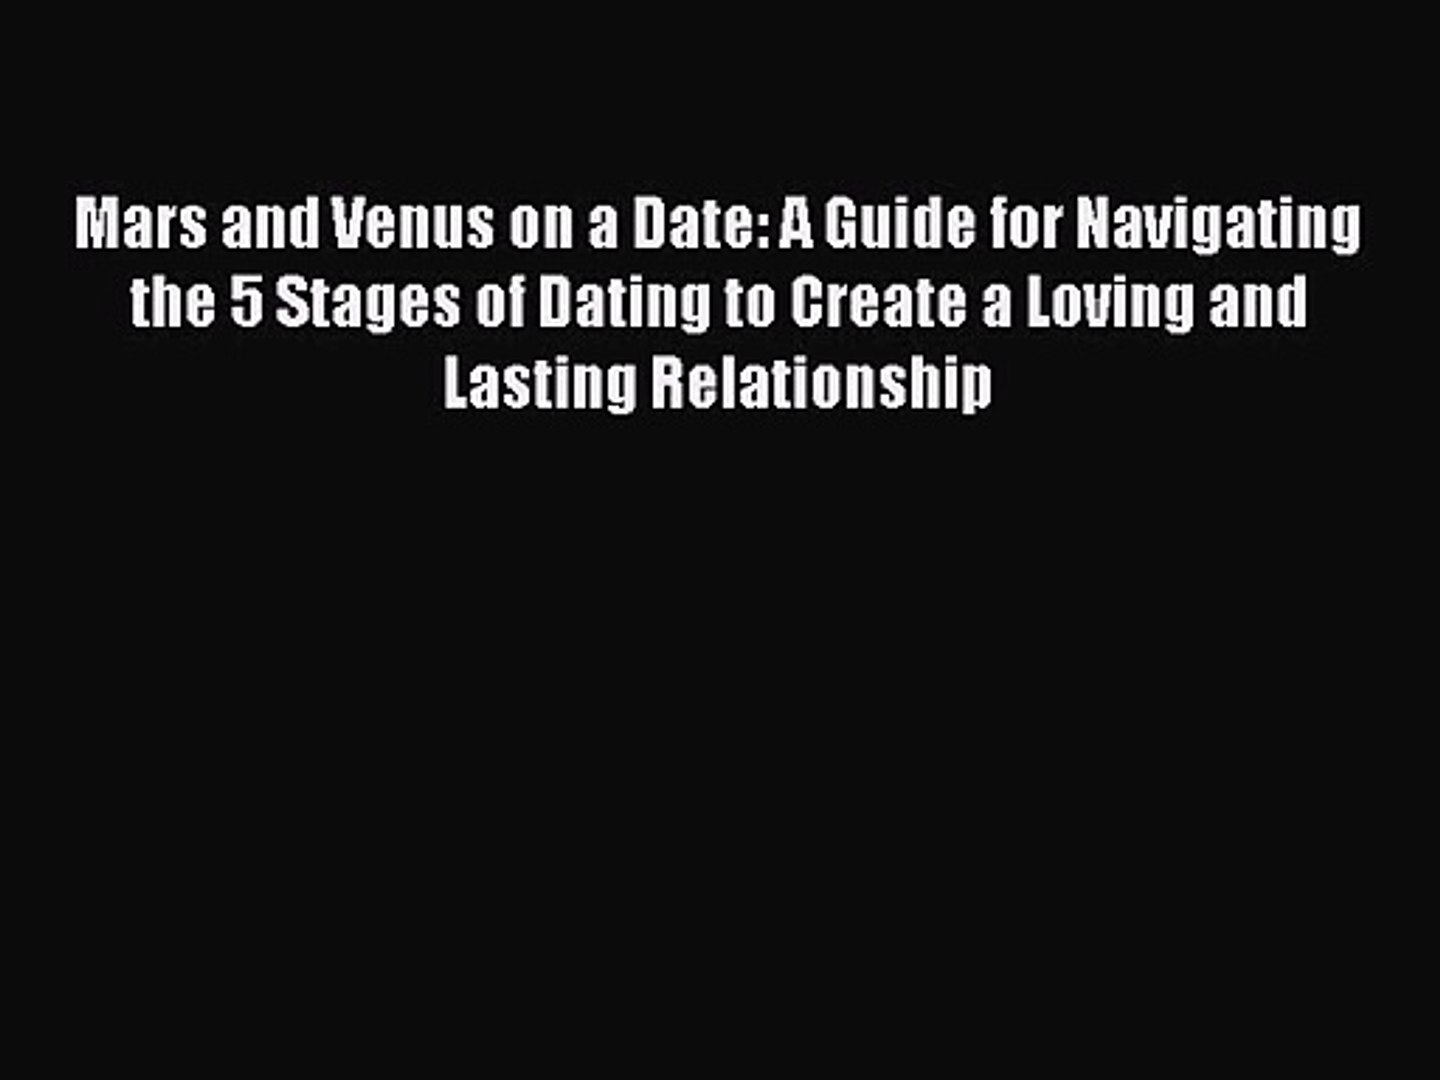 Engaged book dating single pdf married Single, Dating,